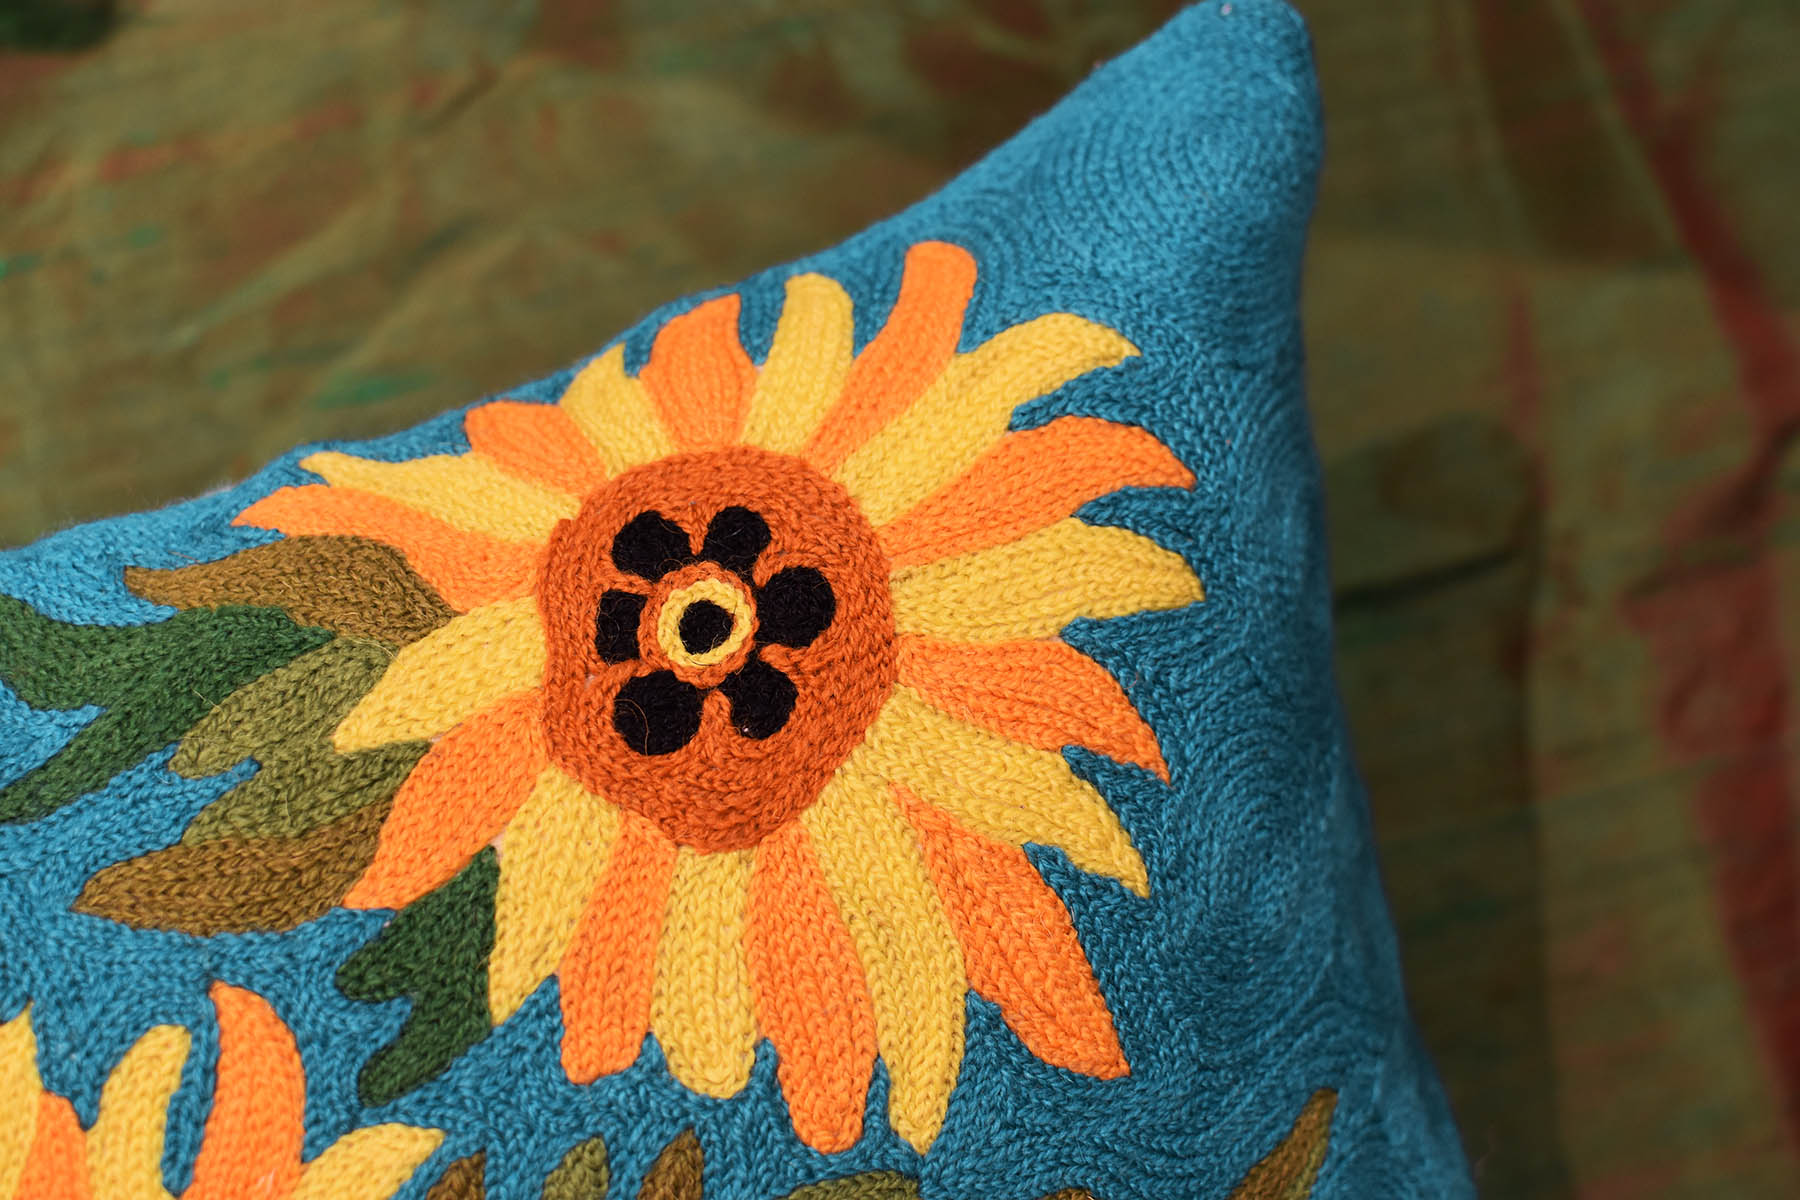 sunflowers I van gogh teal decorative pillow cover handembroidered ...